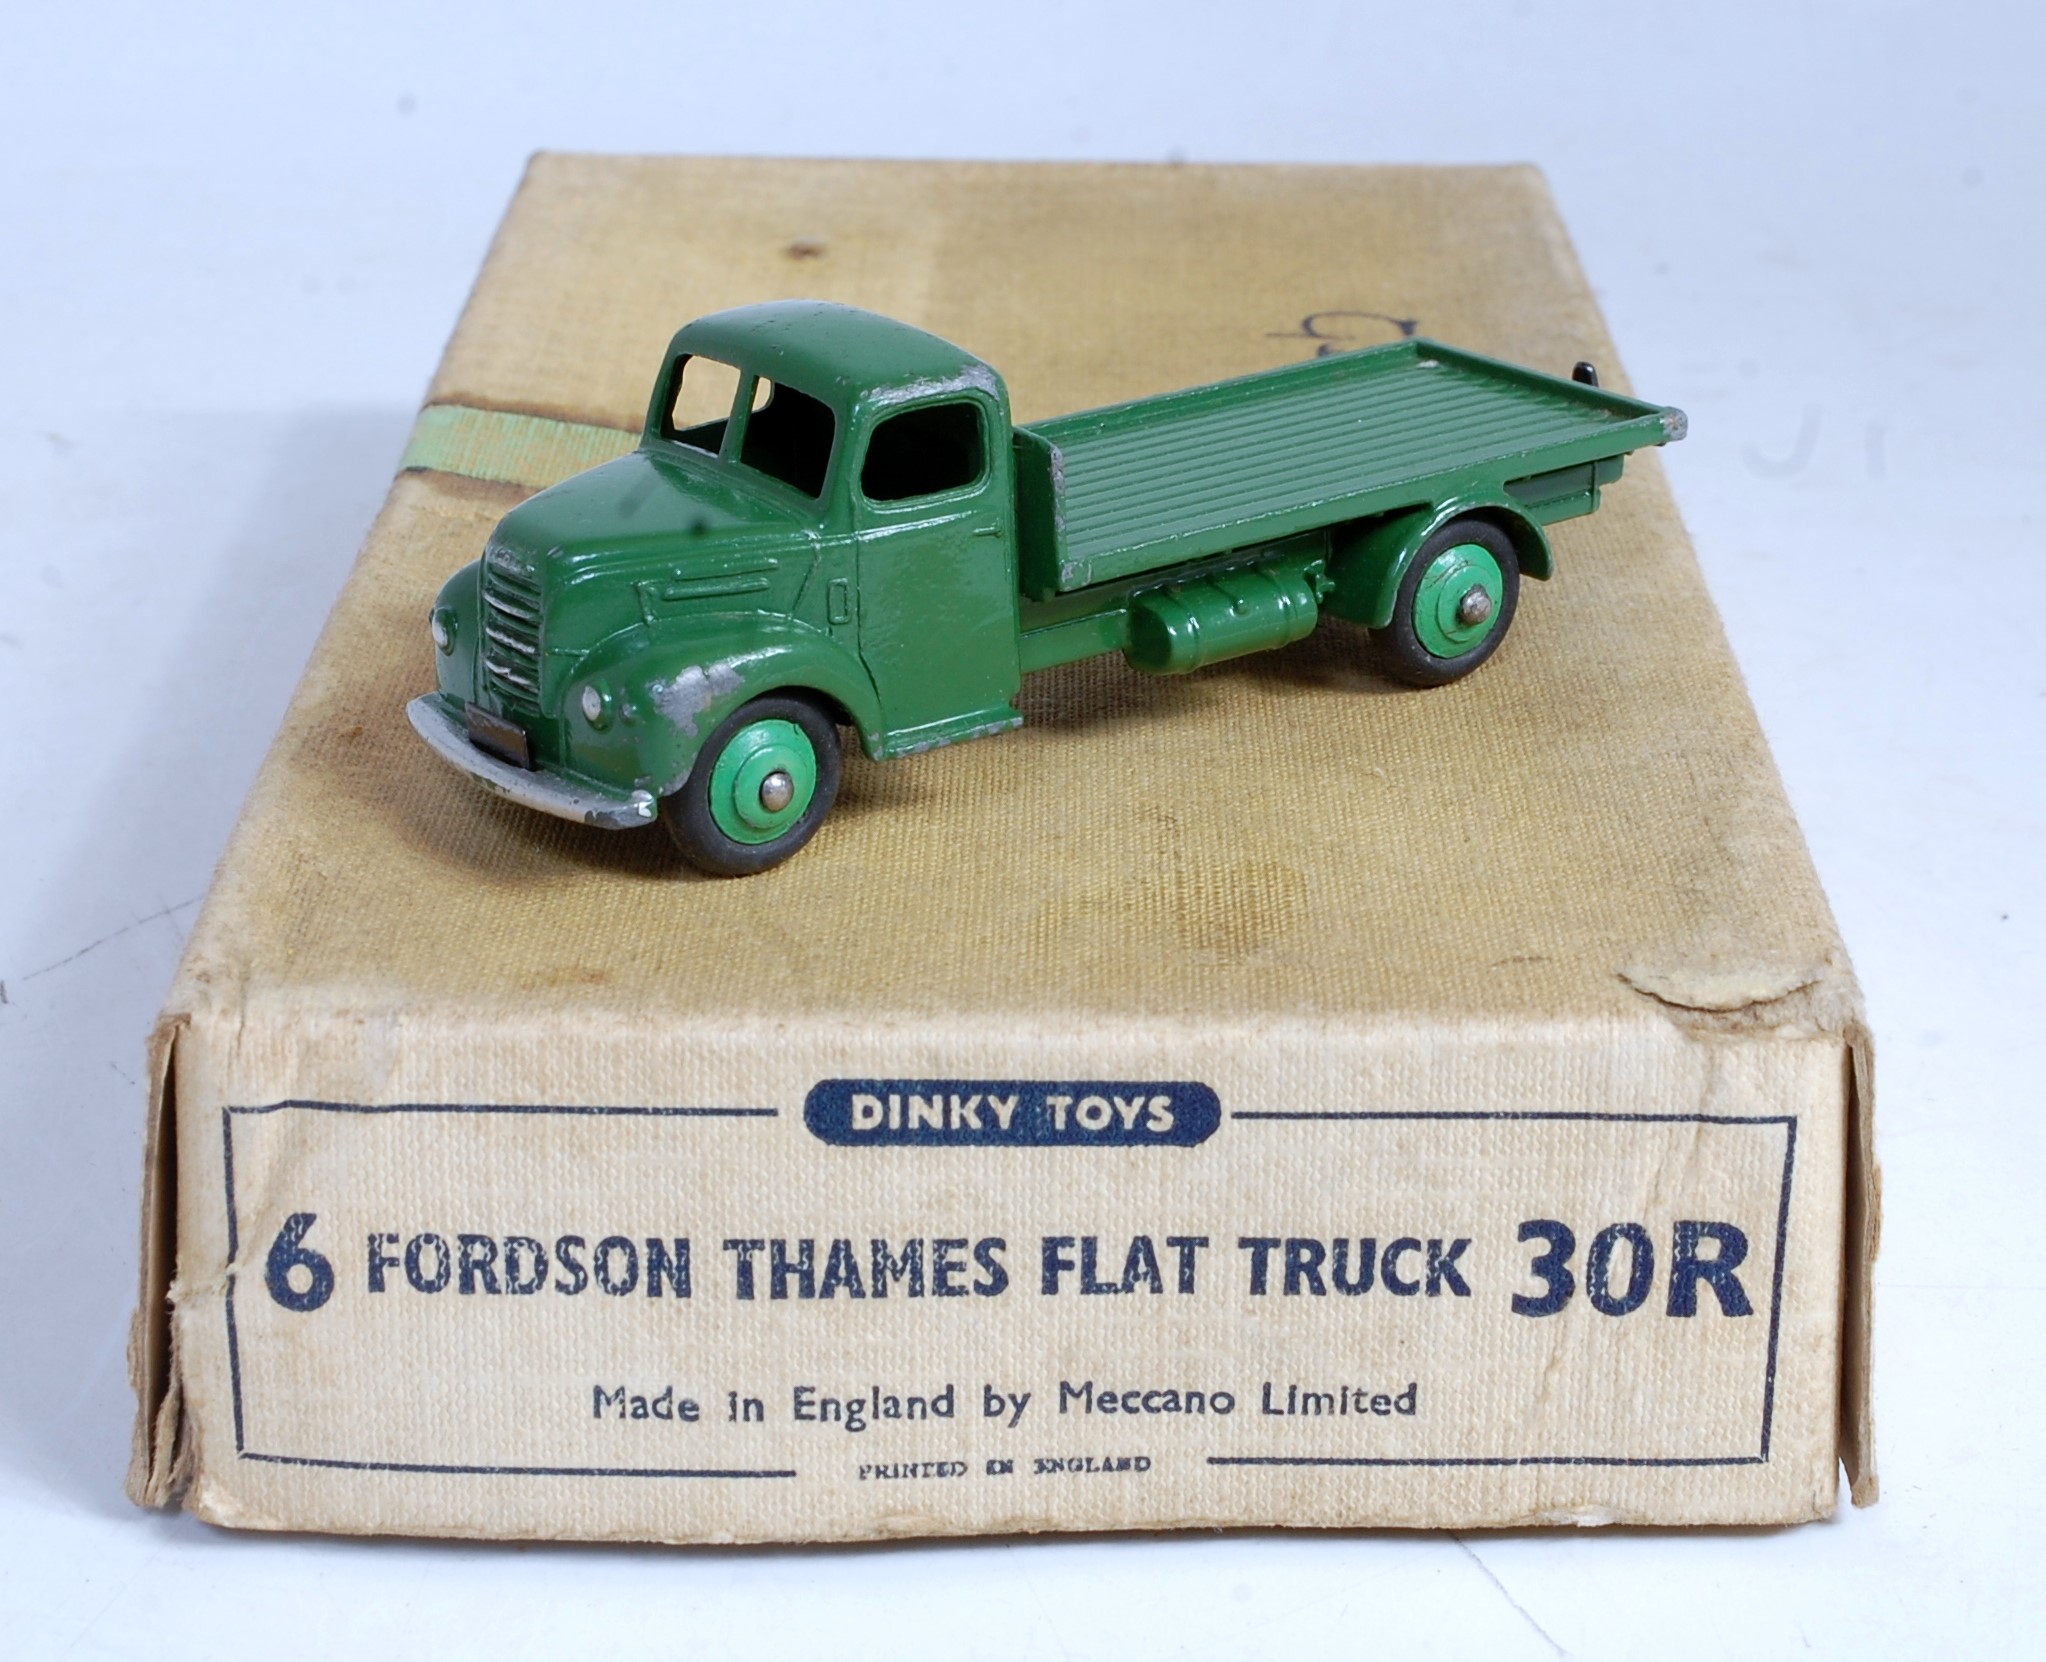 A Dinky Toys trade box No. 30R Fordson Thames flat truck containing one green example, box is